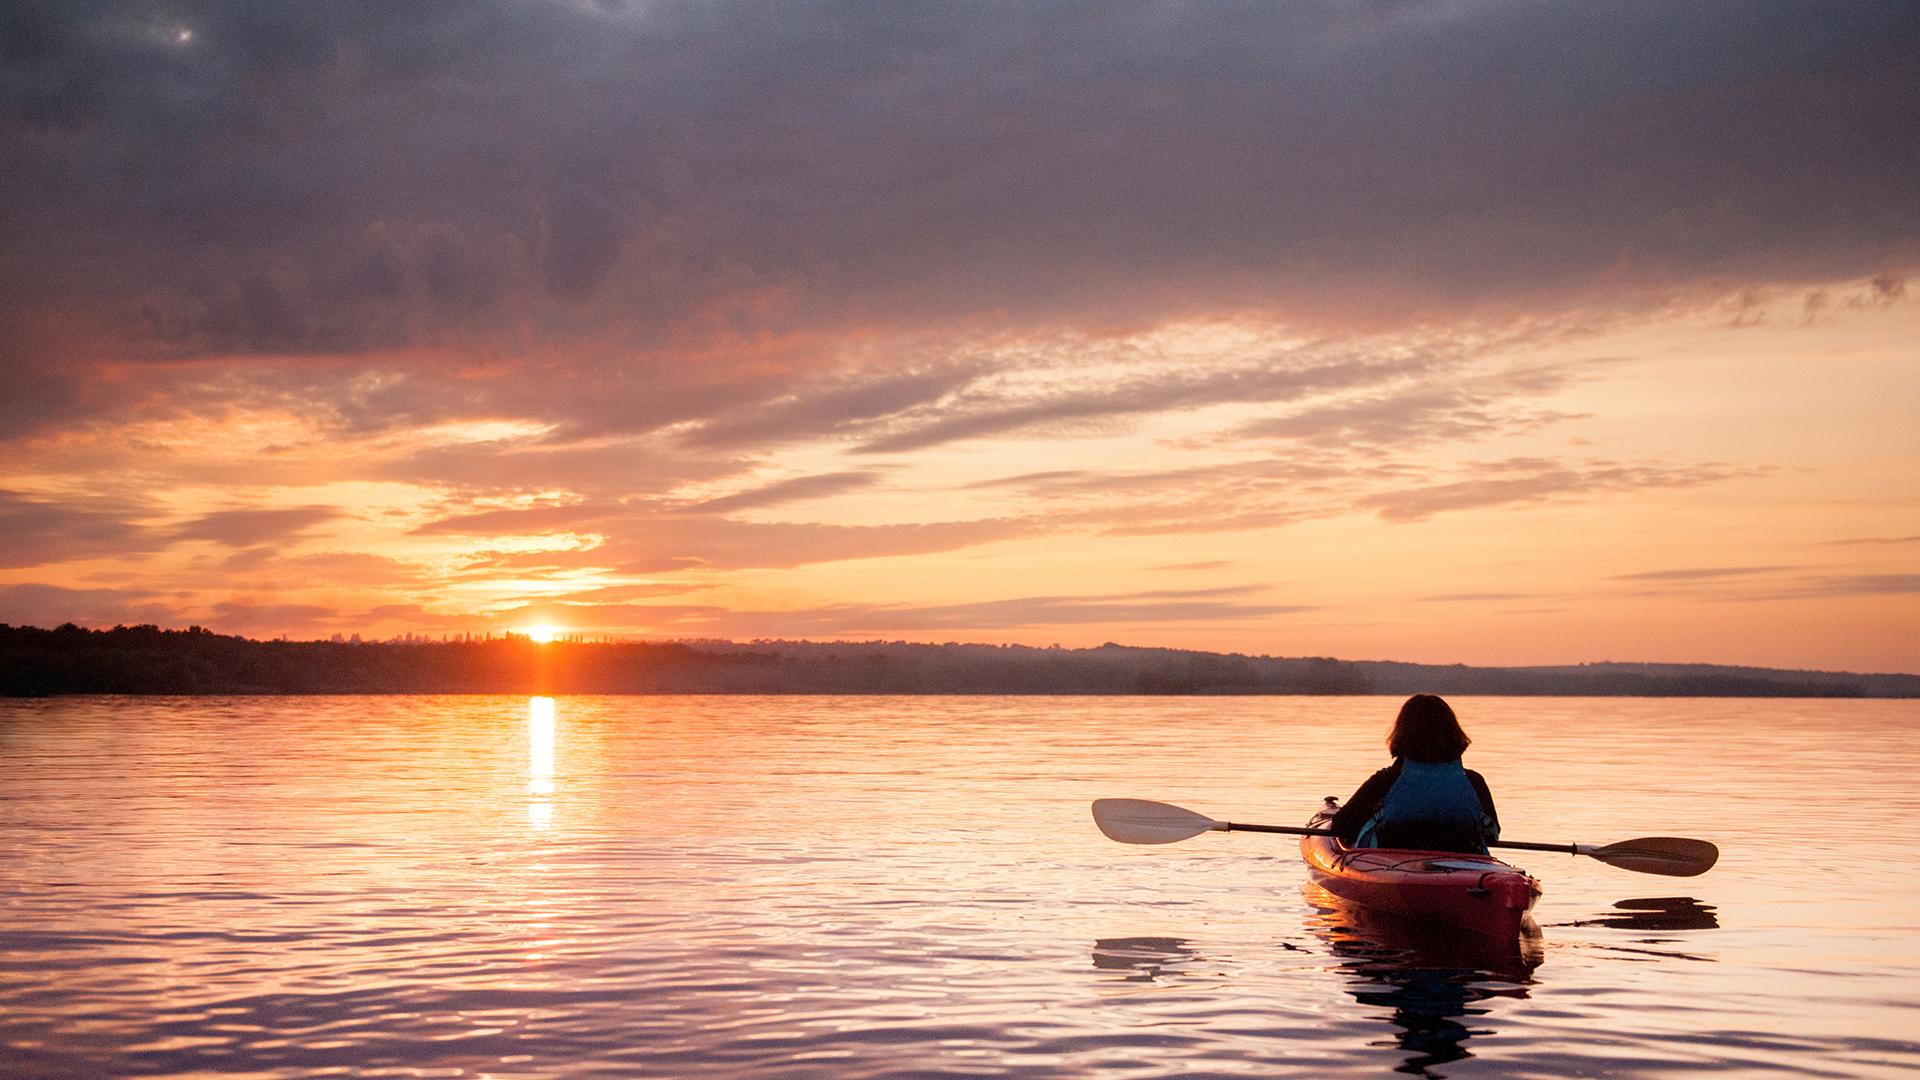 Woman in a kayak on the river on the scenic sunset